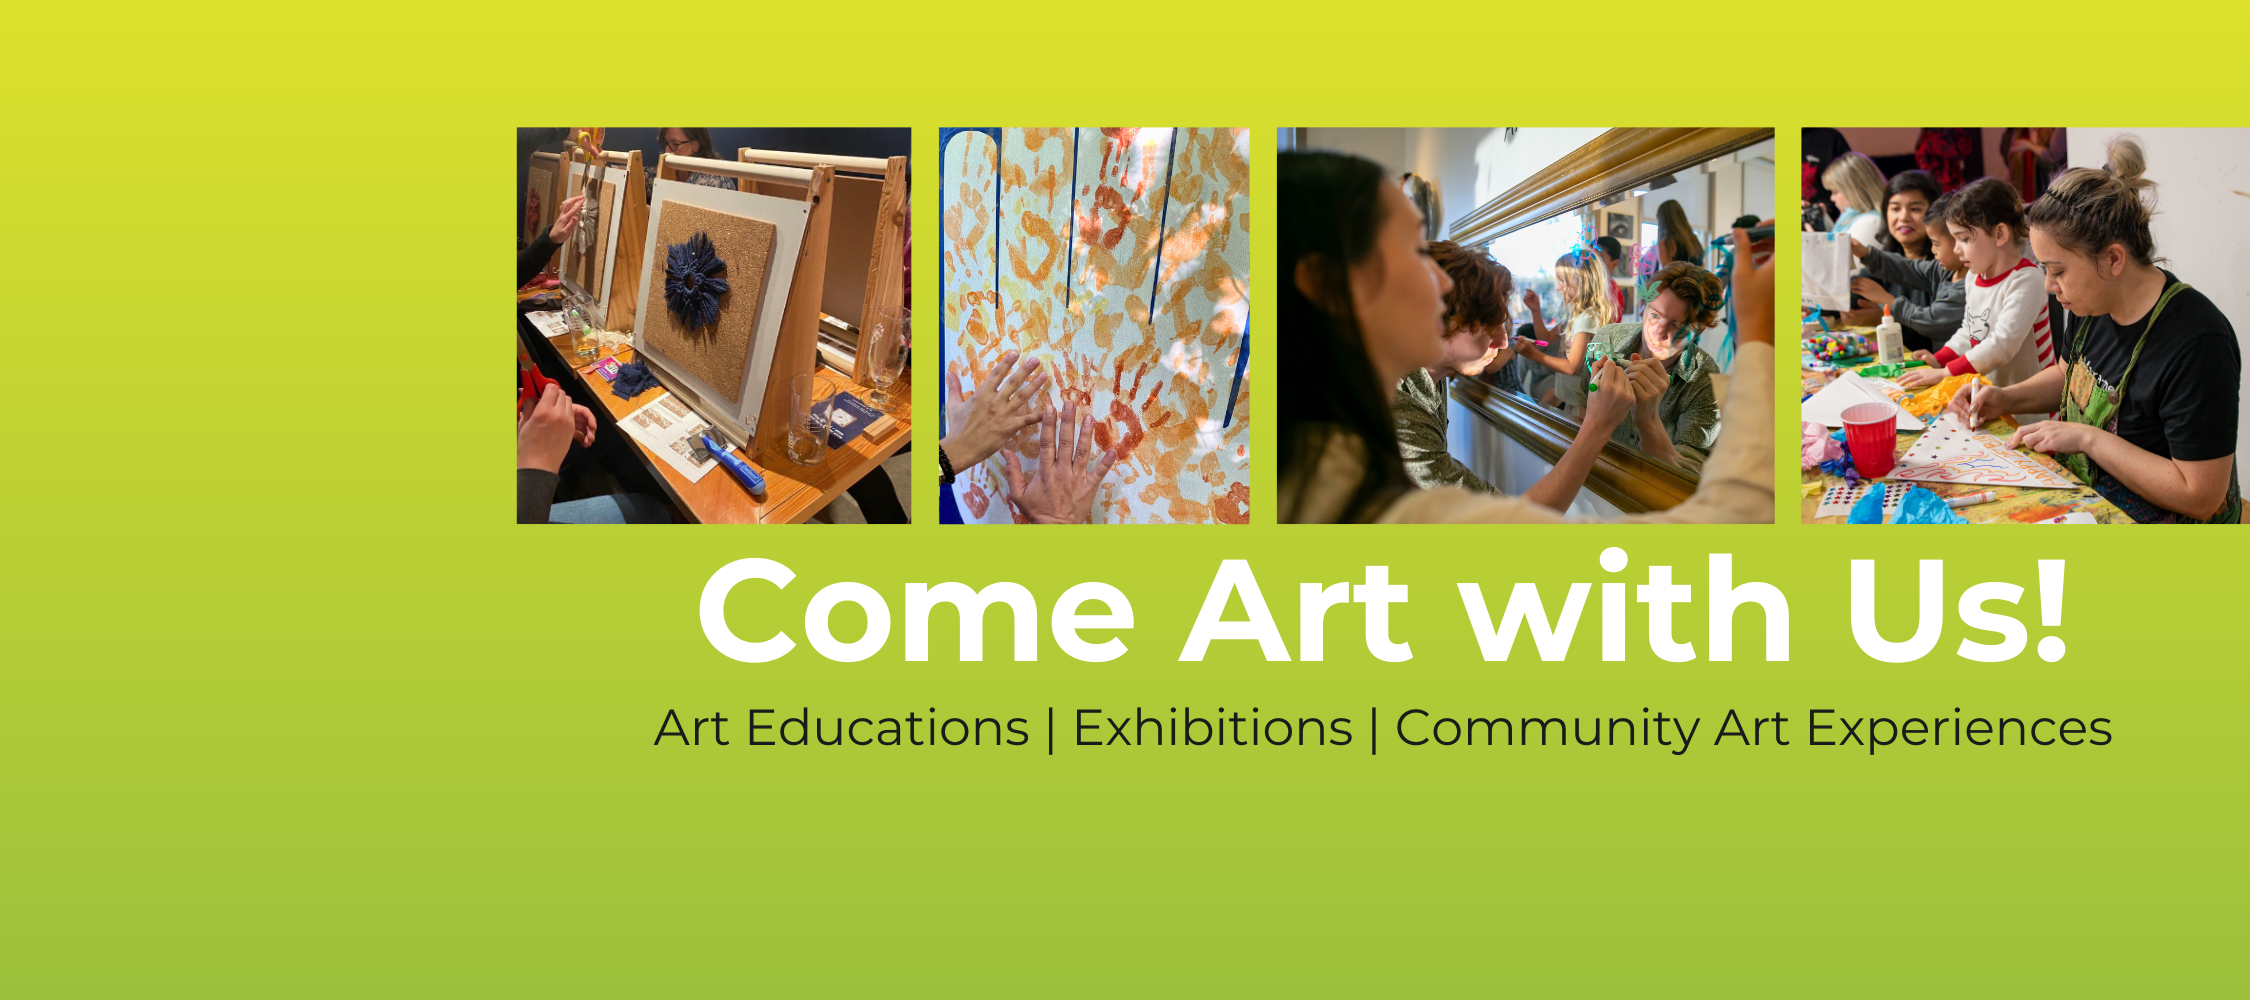 Come Art with Us!